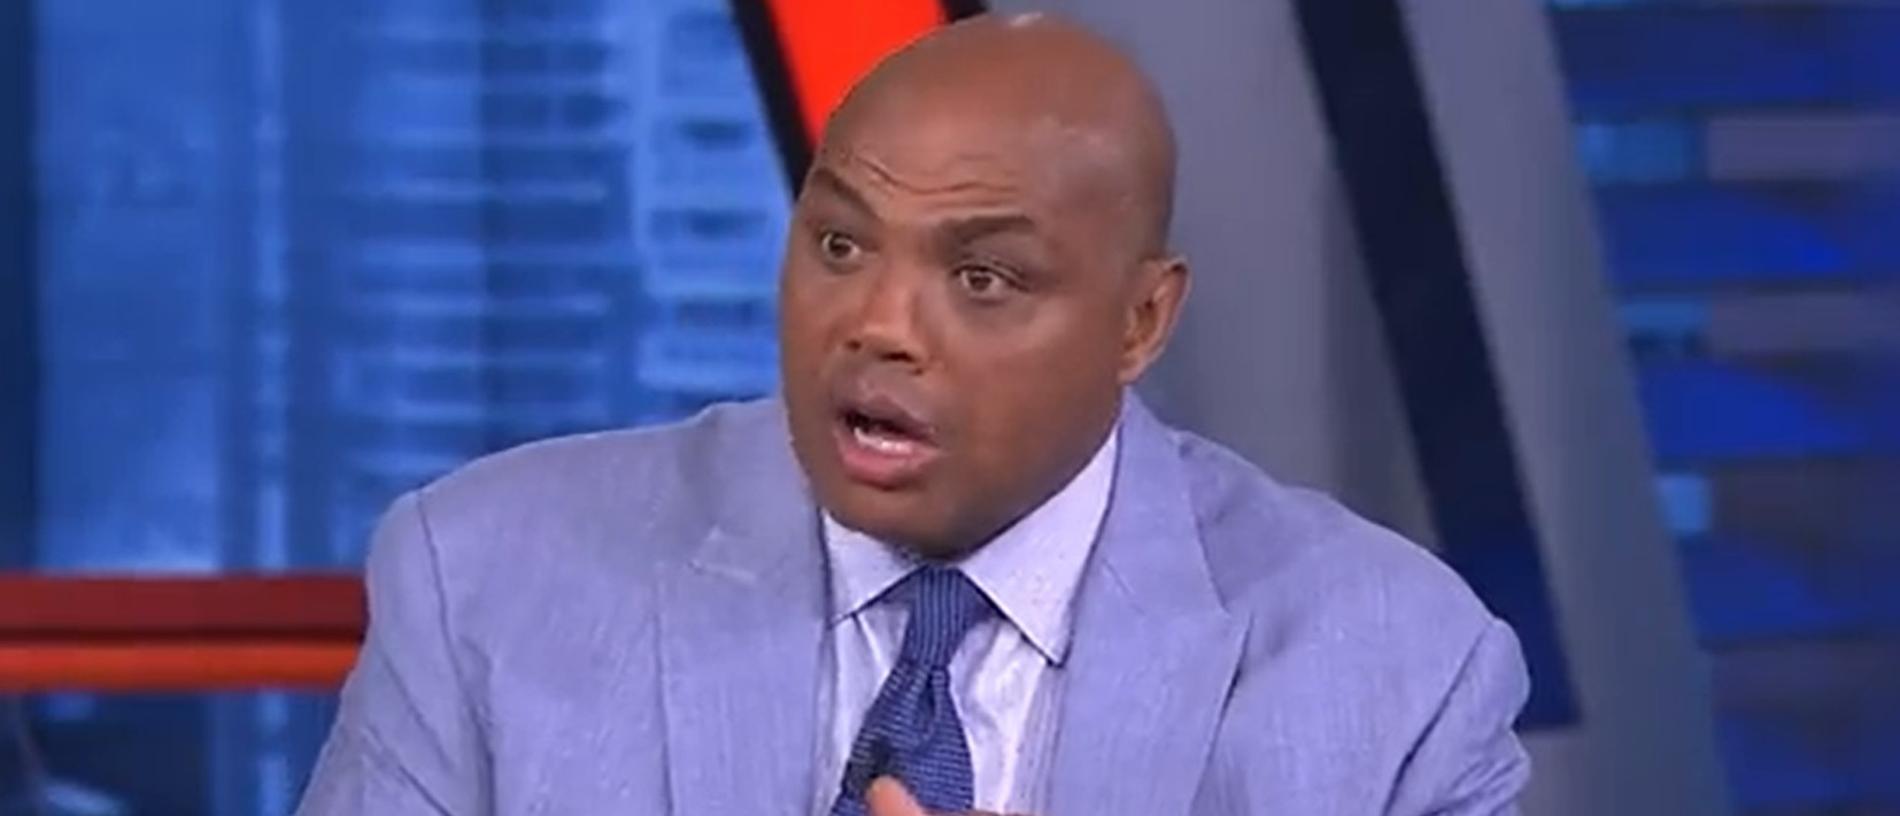 Charles Barkley's new TNT contract worth more than $100 million